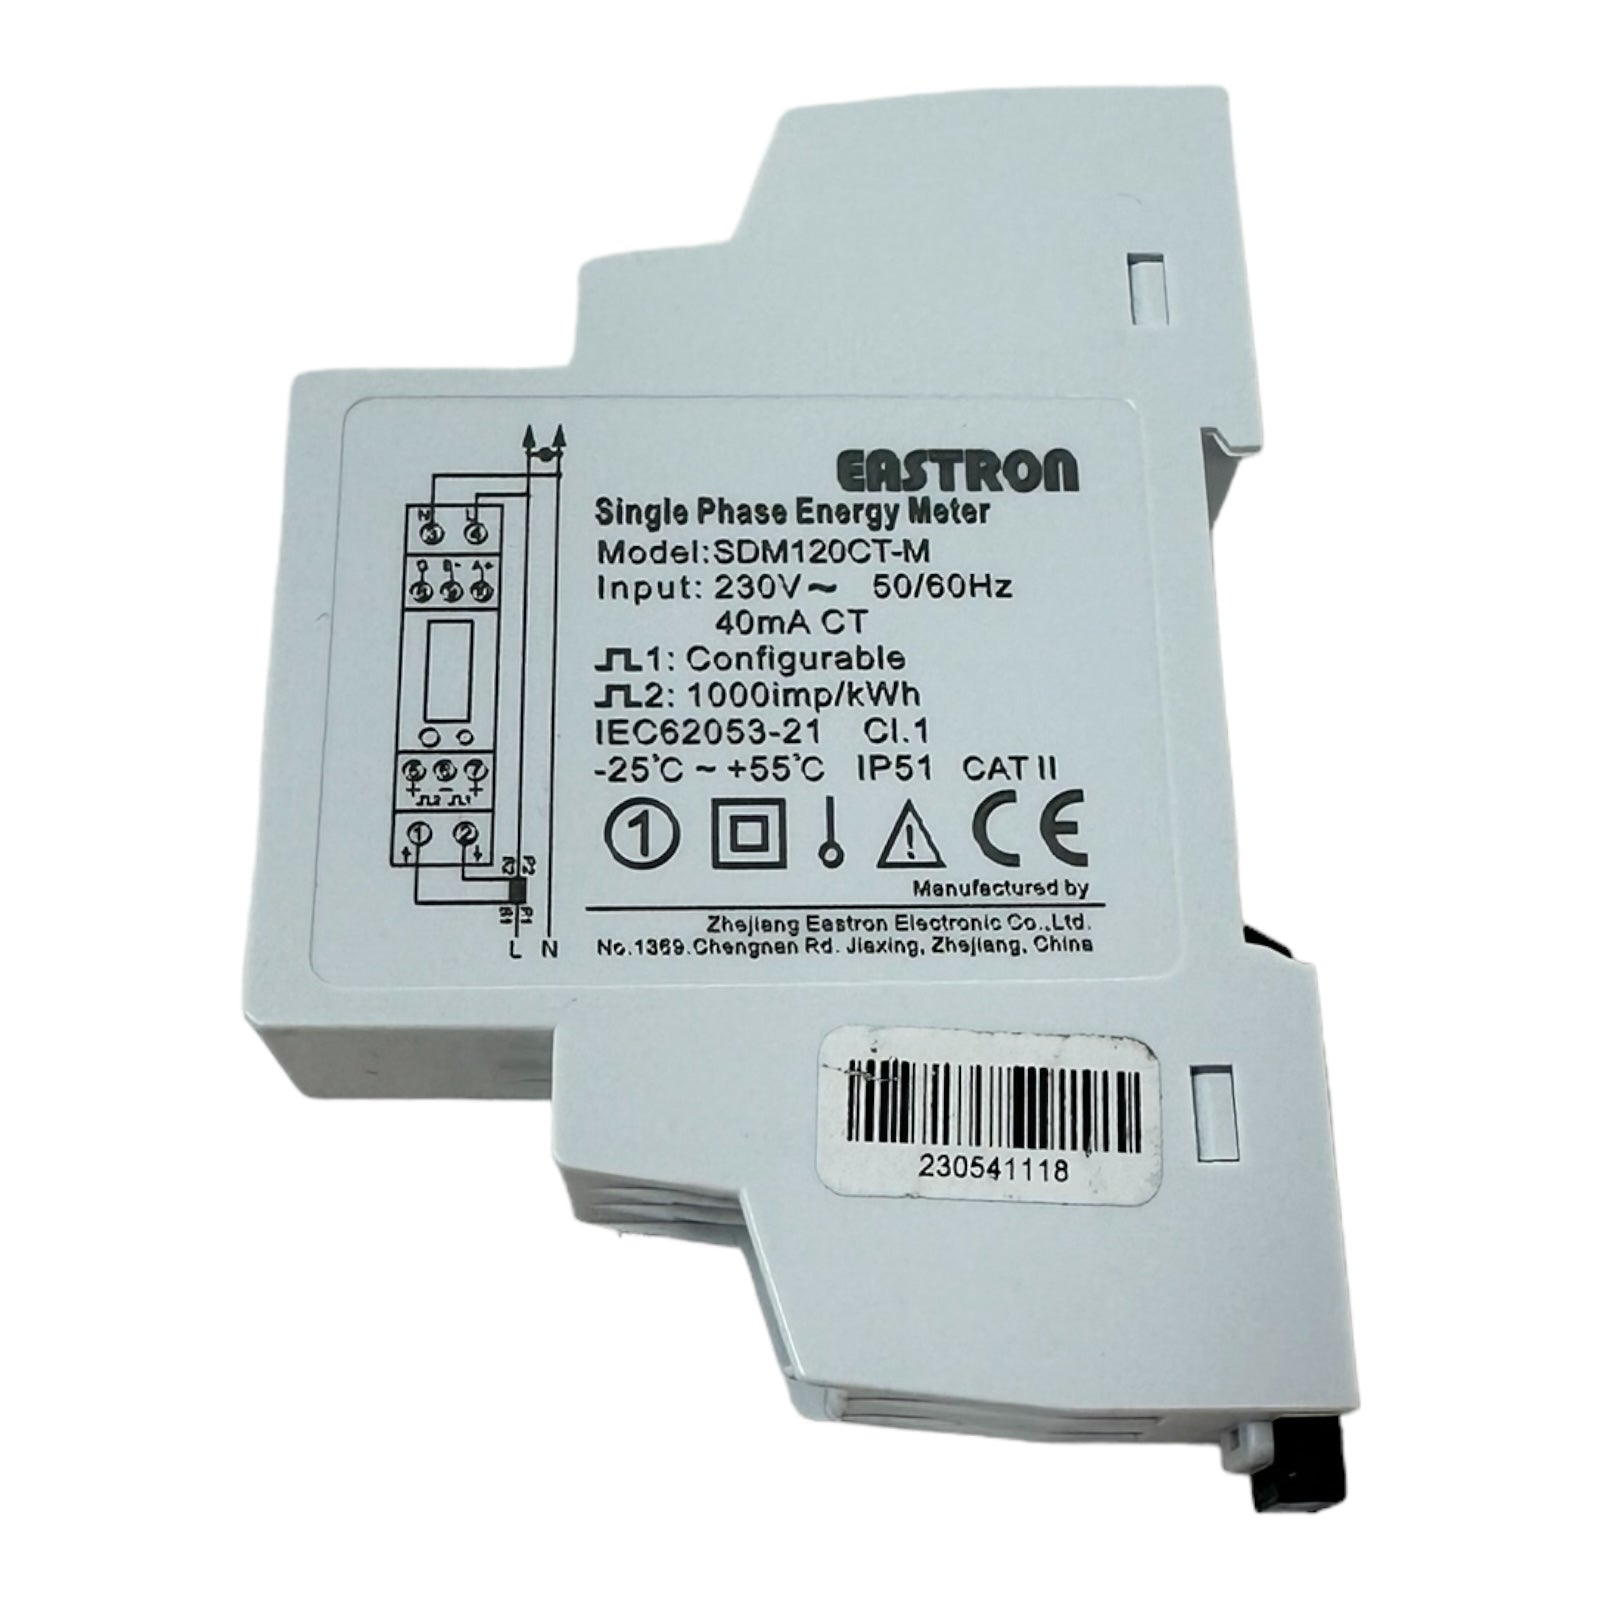 Single-phase Multifunction Din Rail Meter - SDM120CTM /40mA Modbus with CT-40mA